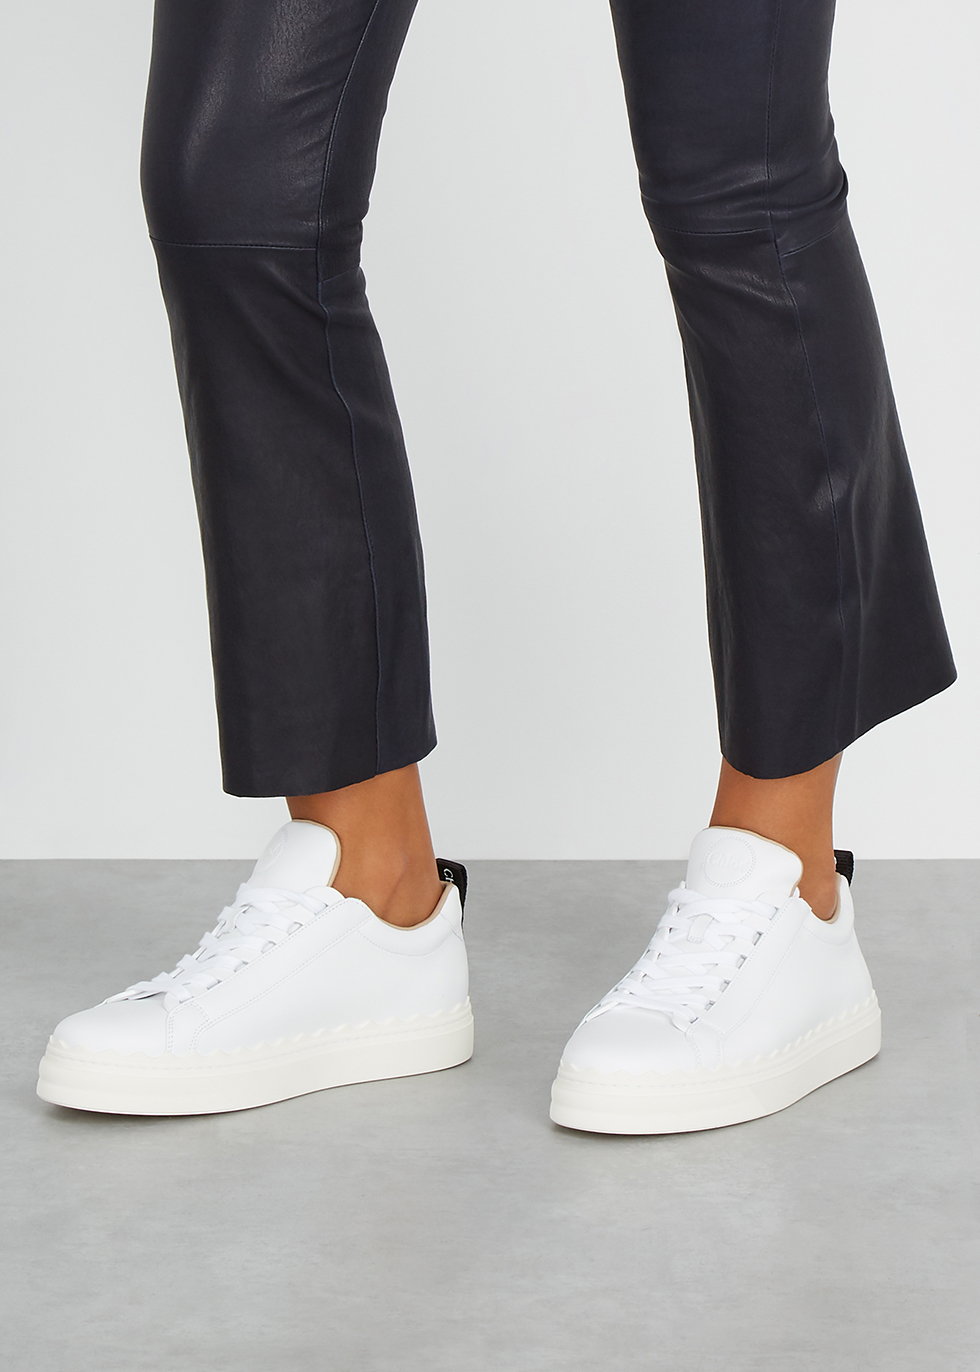 Chloé Lauren white leather sneakers 